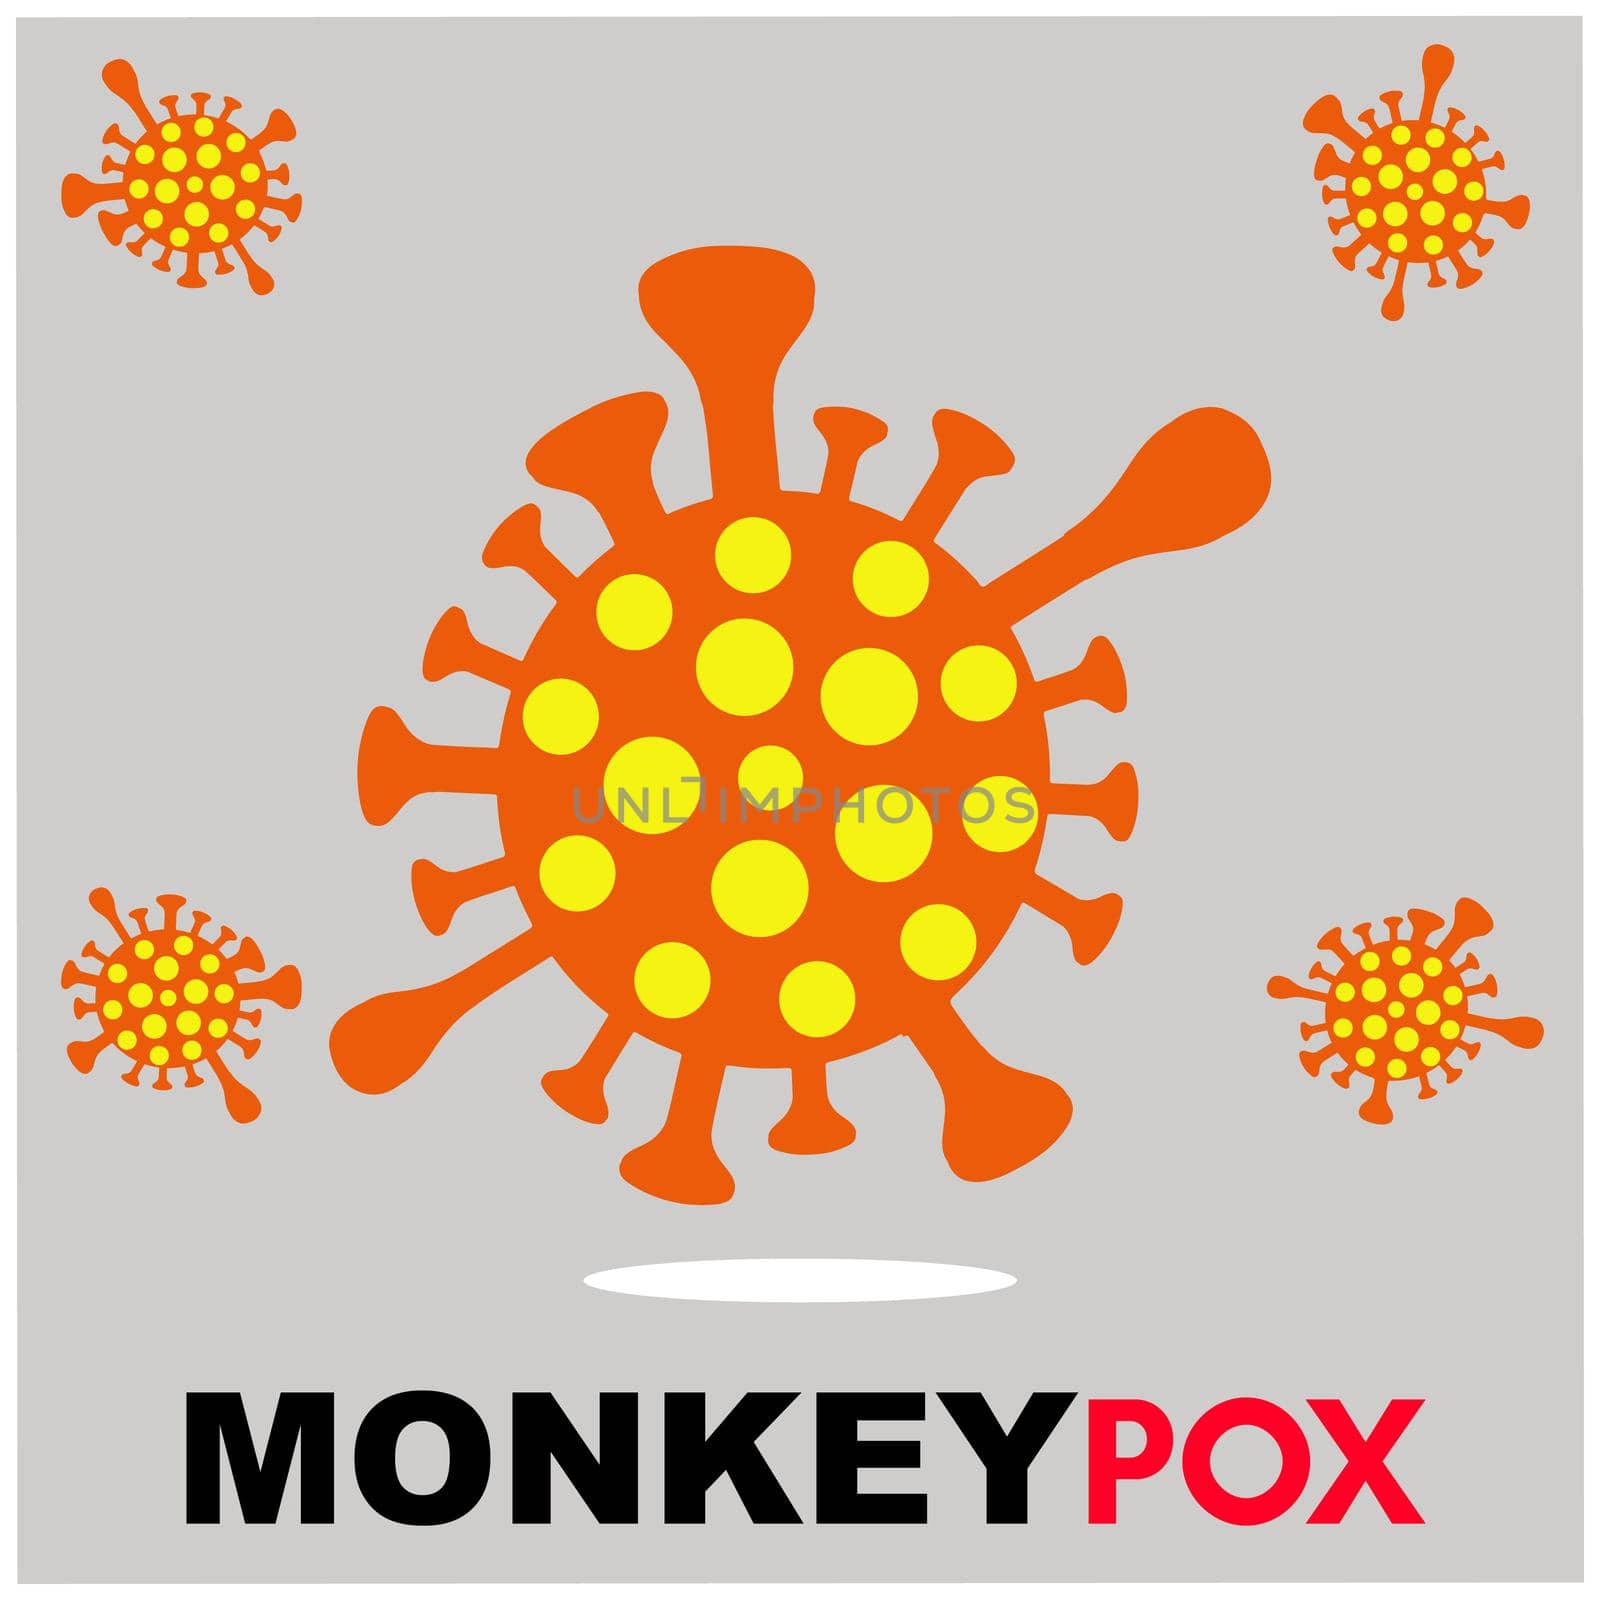 Monkeypox virus Illustration, vector of Hands with monkeypox, monkeypox virus outbreak pandemic design with microscopic view background